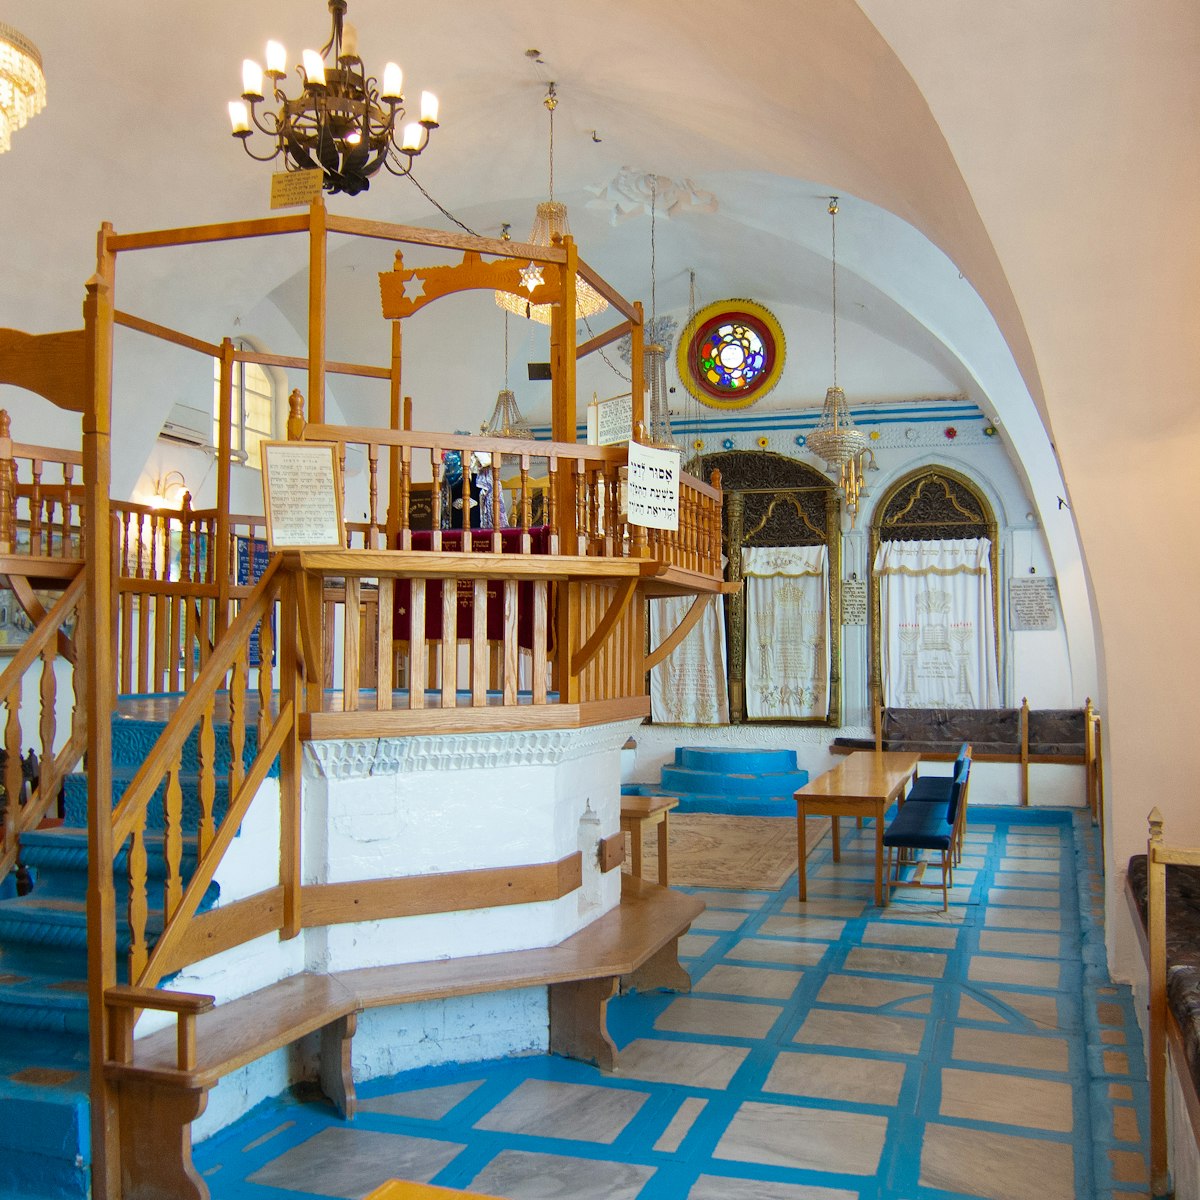 Interior of the historic Sephardic Ary synagogue in Tsfat, Israel.